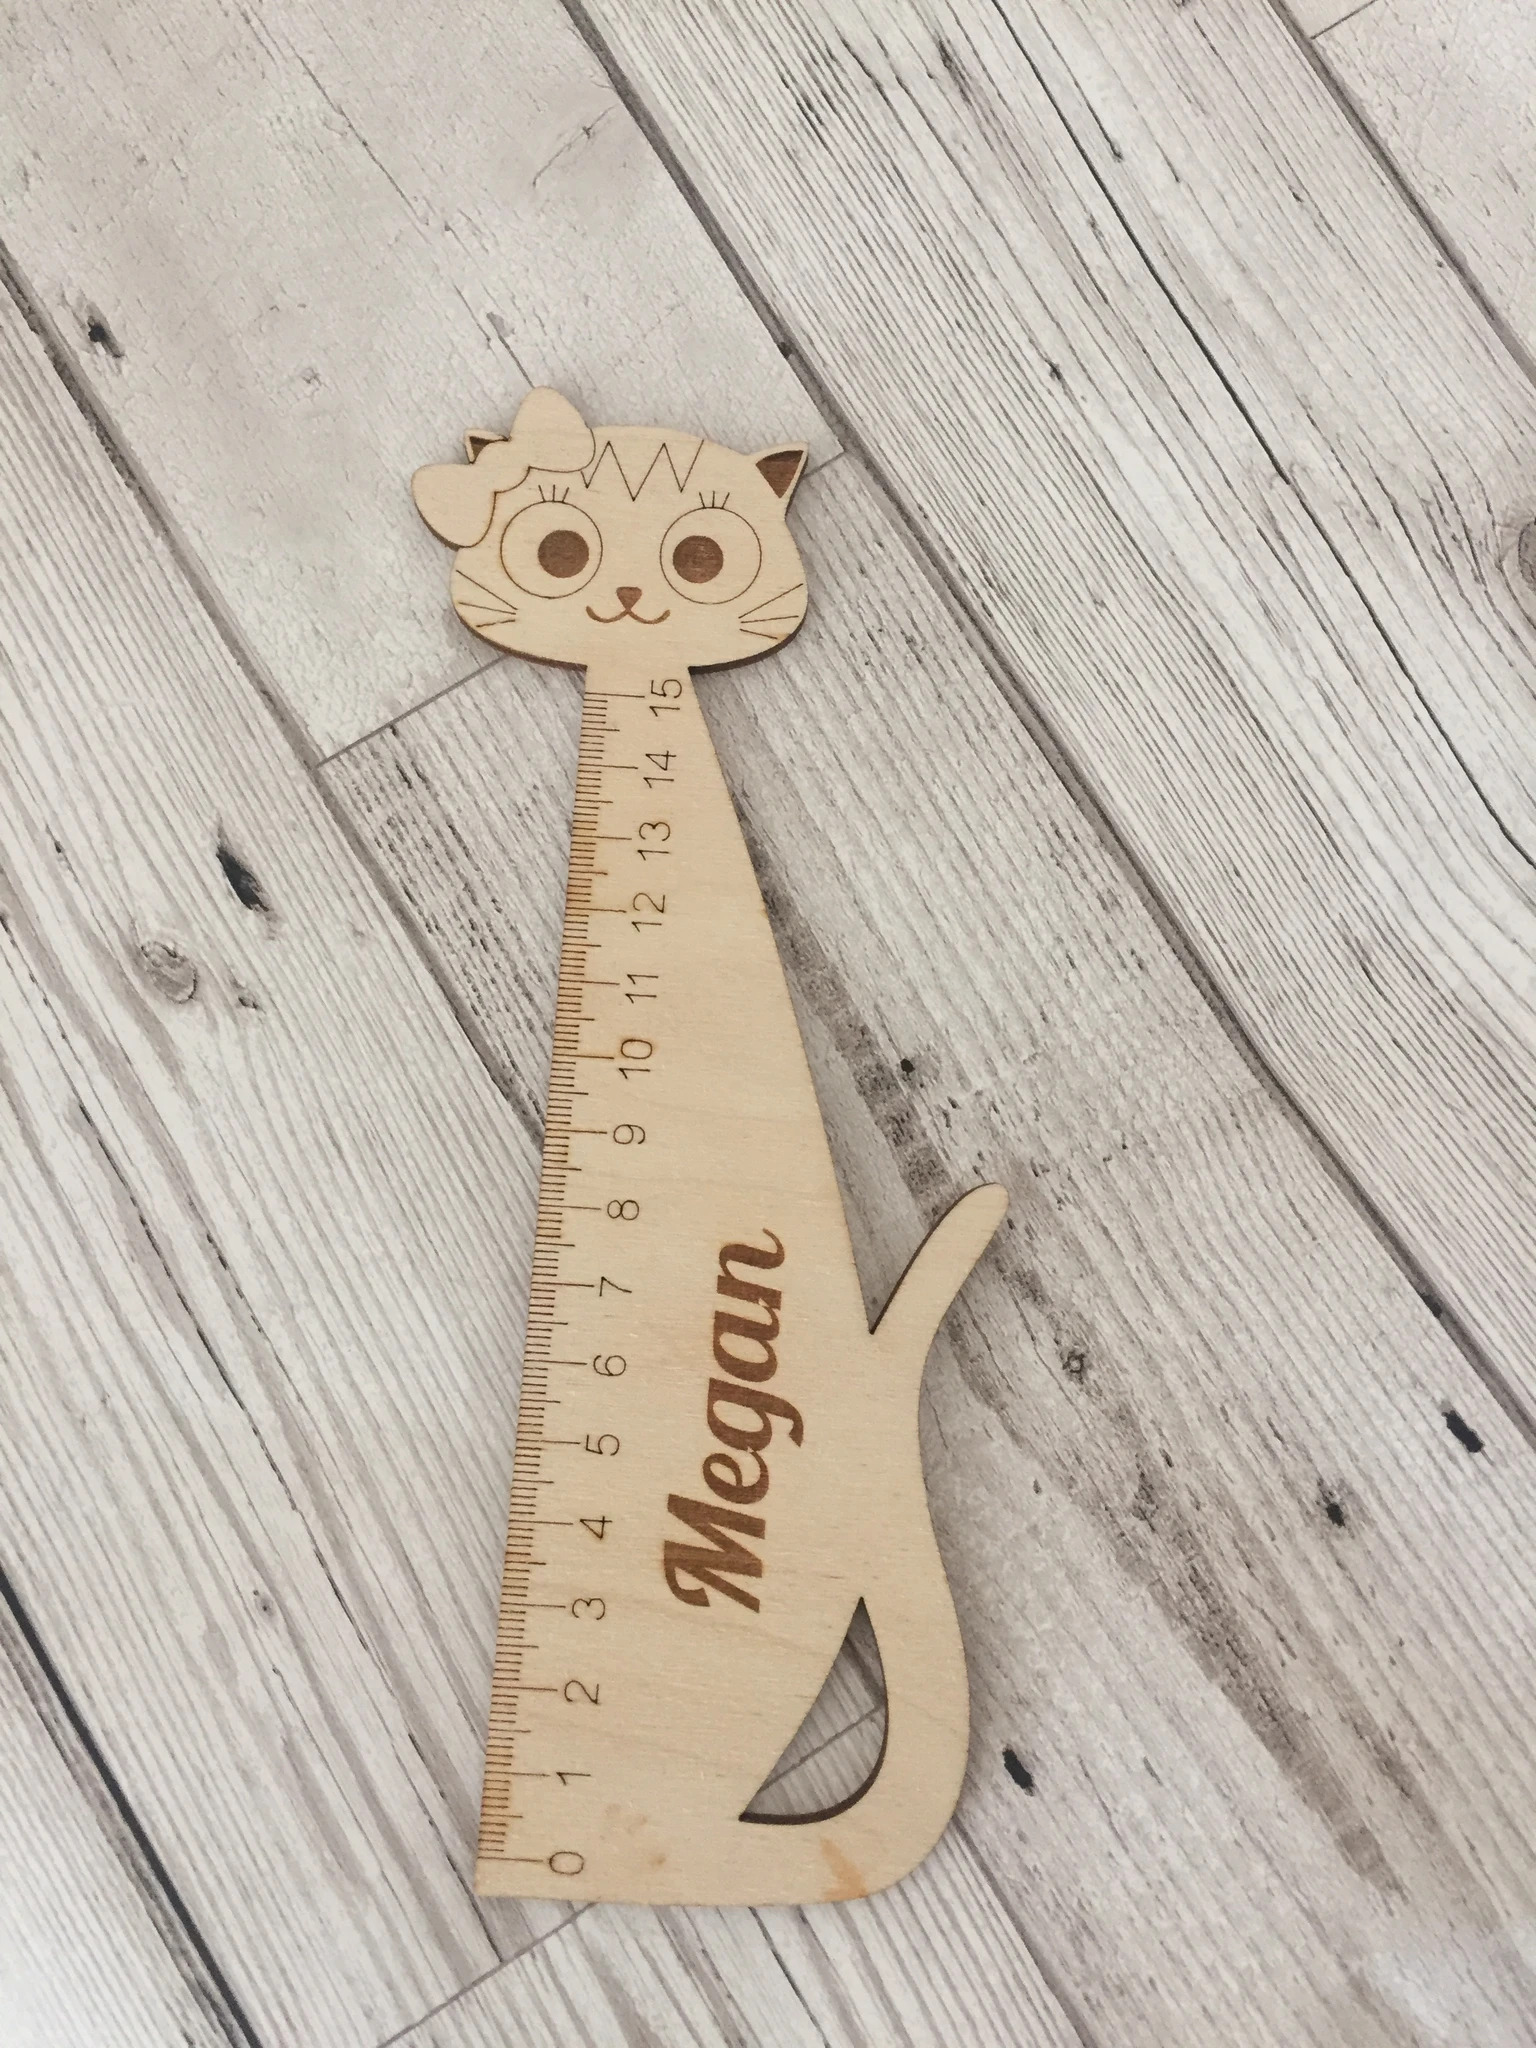 Laser Cut Personalised Wooden Ruler Cat Shape Free Vector - Designs CNC